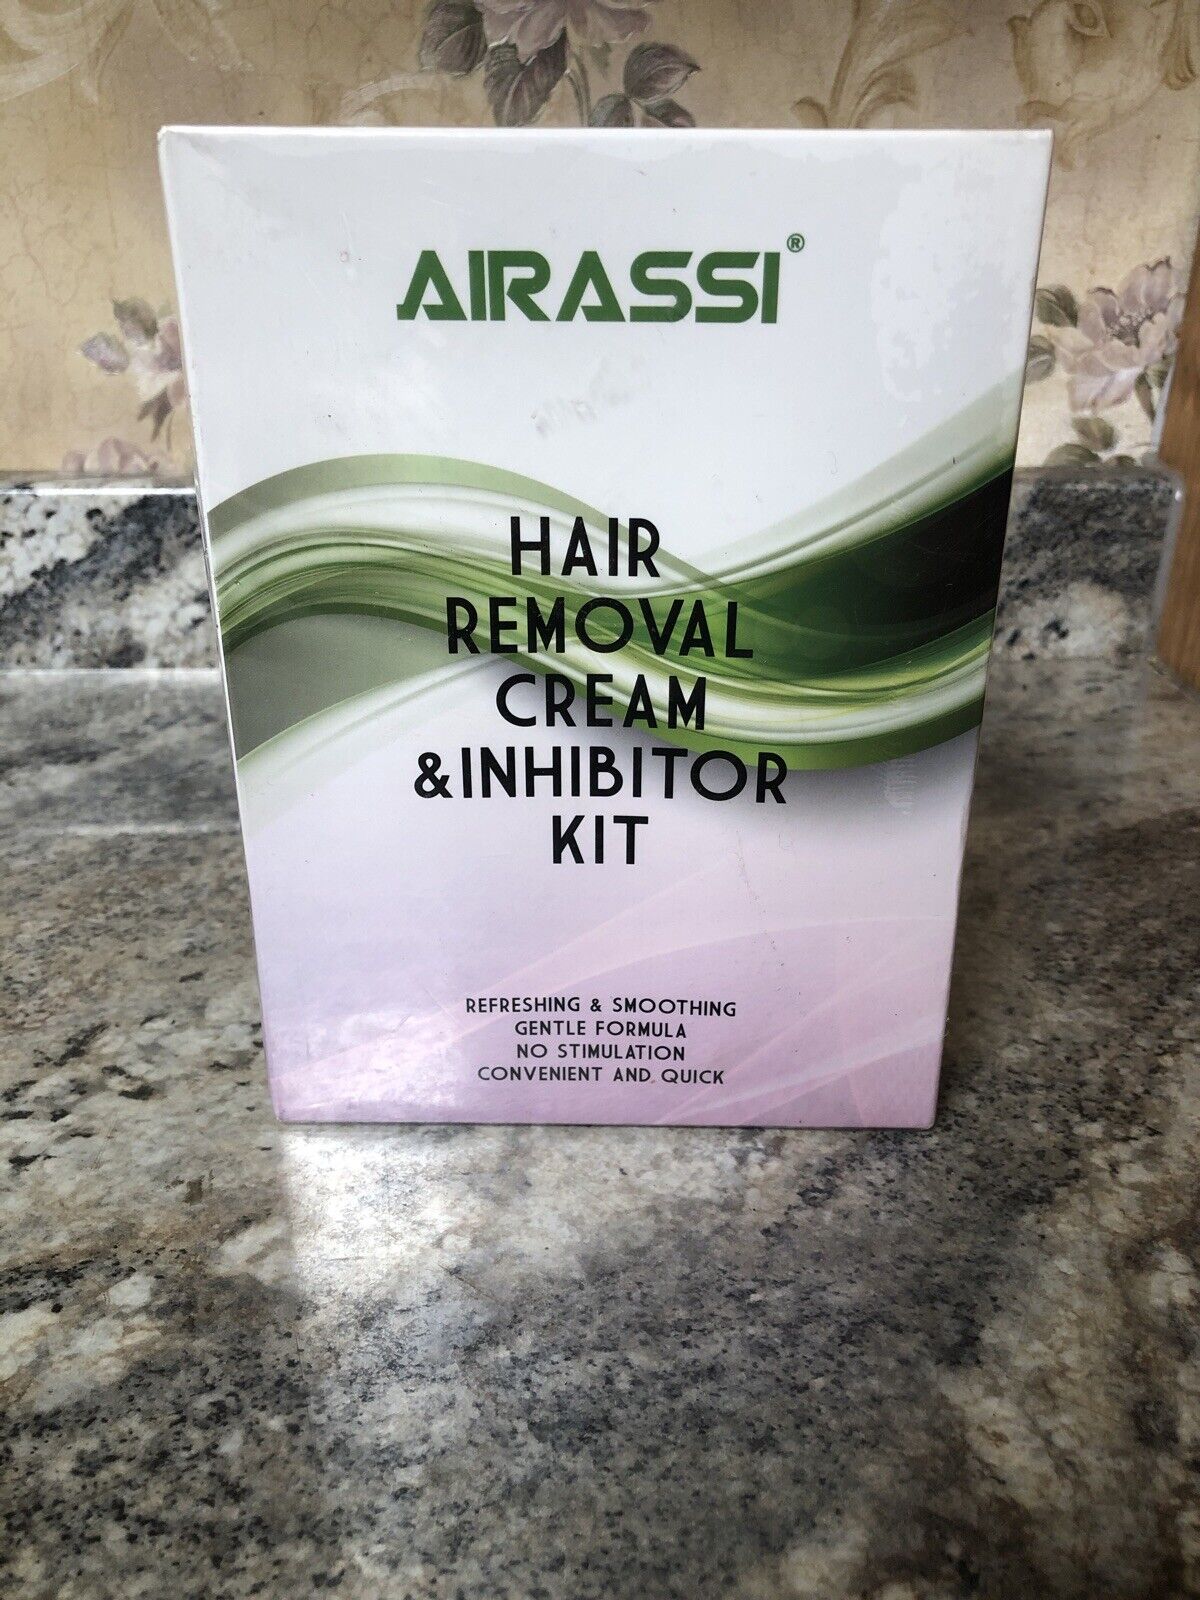 New Sealed Cheap SALE Start Airassi Hair Kit Over item handling Inhibitor Removal Cream